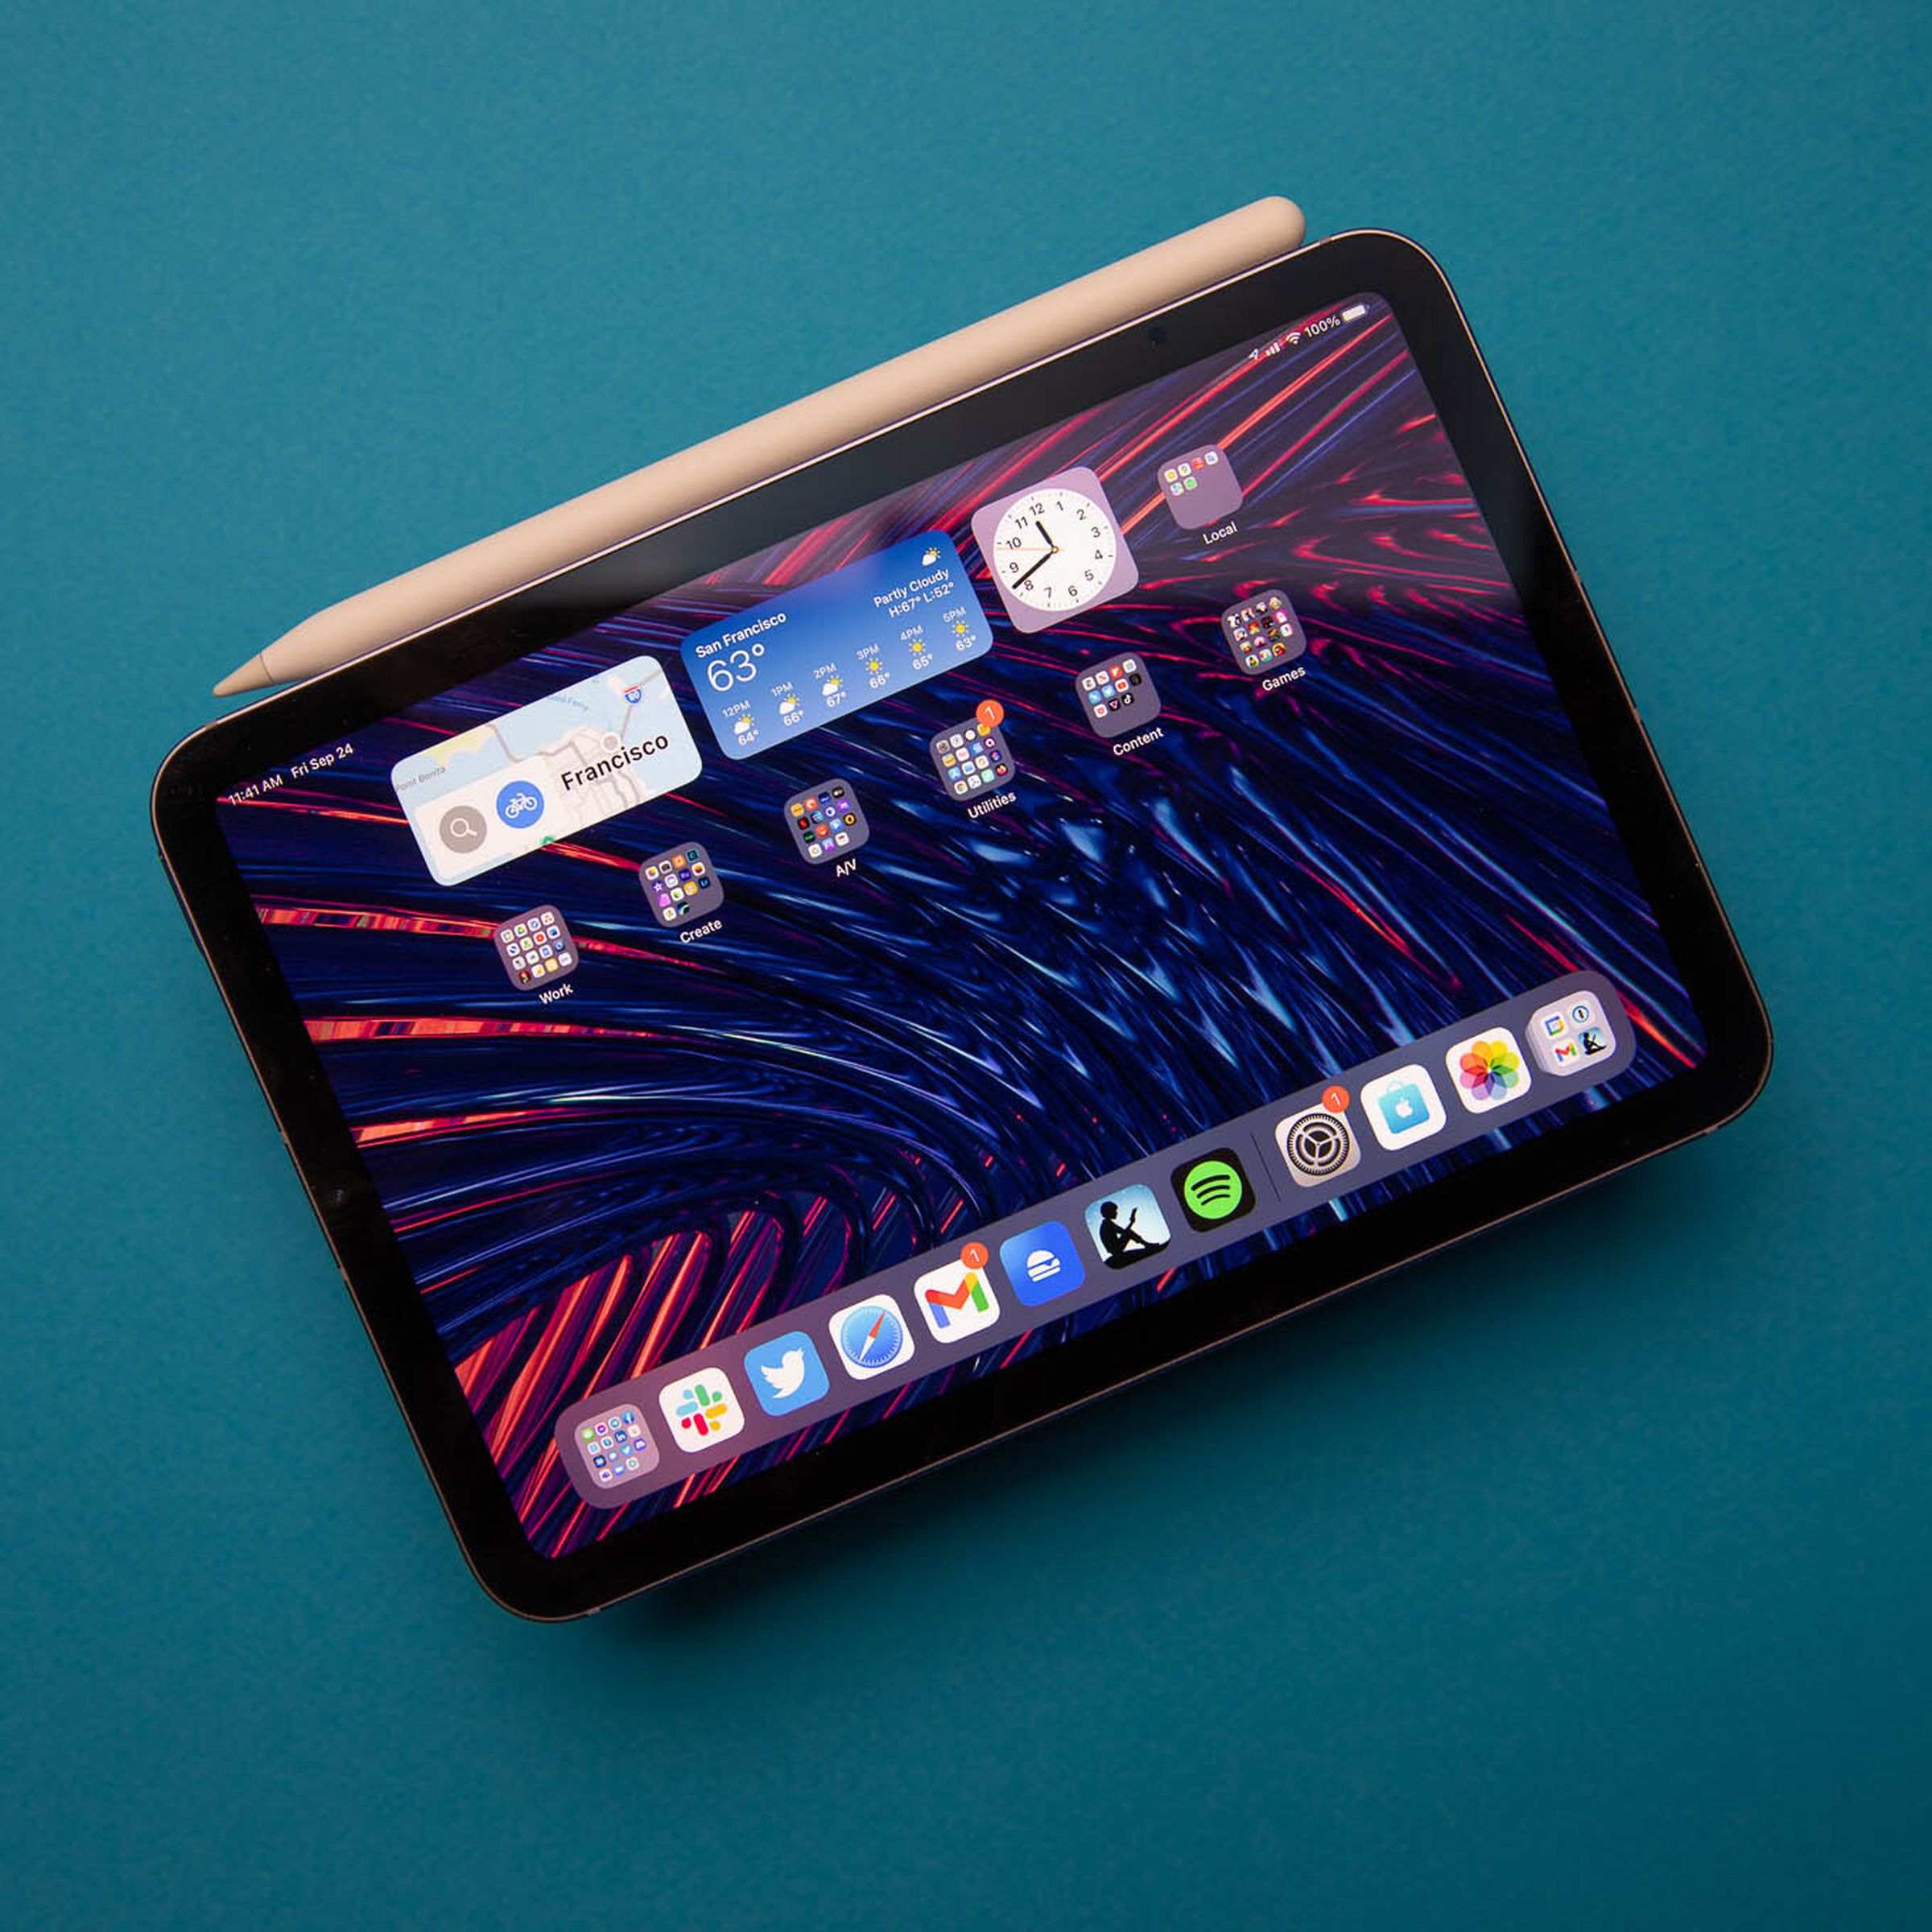 Photo of the 2021 iPad mini with attached second-generation Apple Pencil on blue background